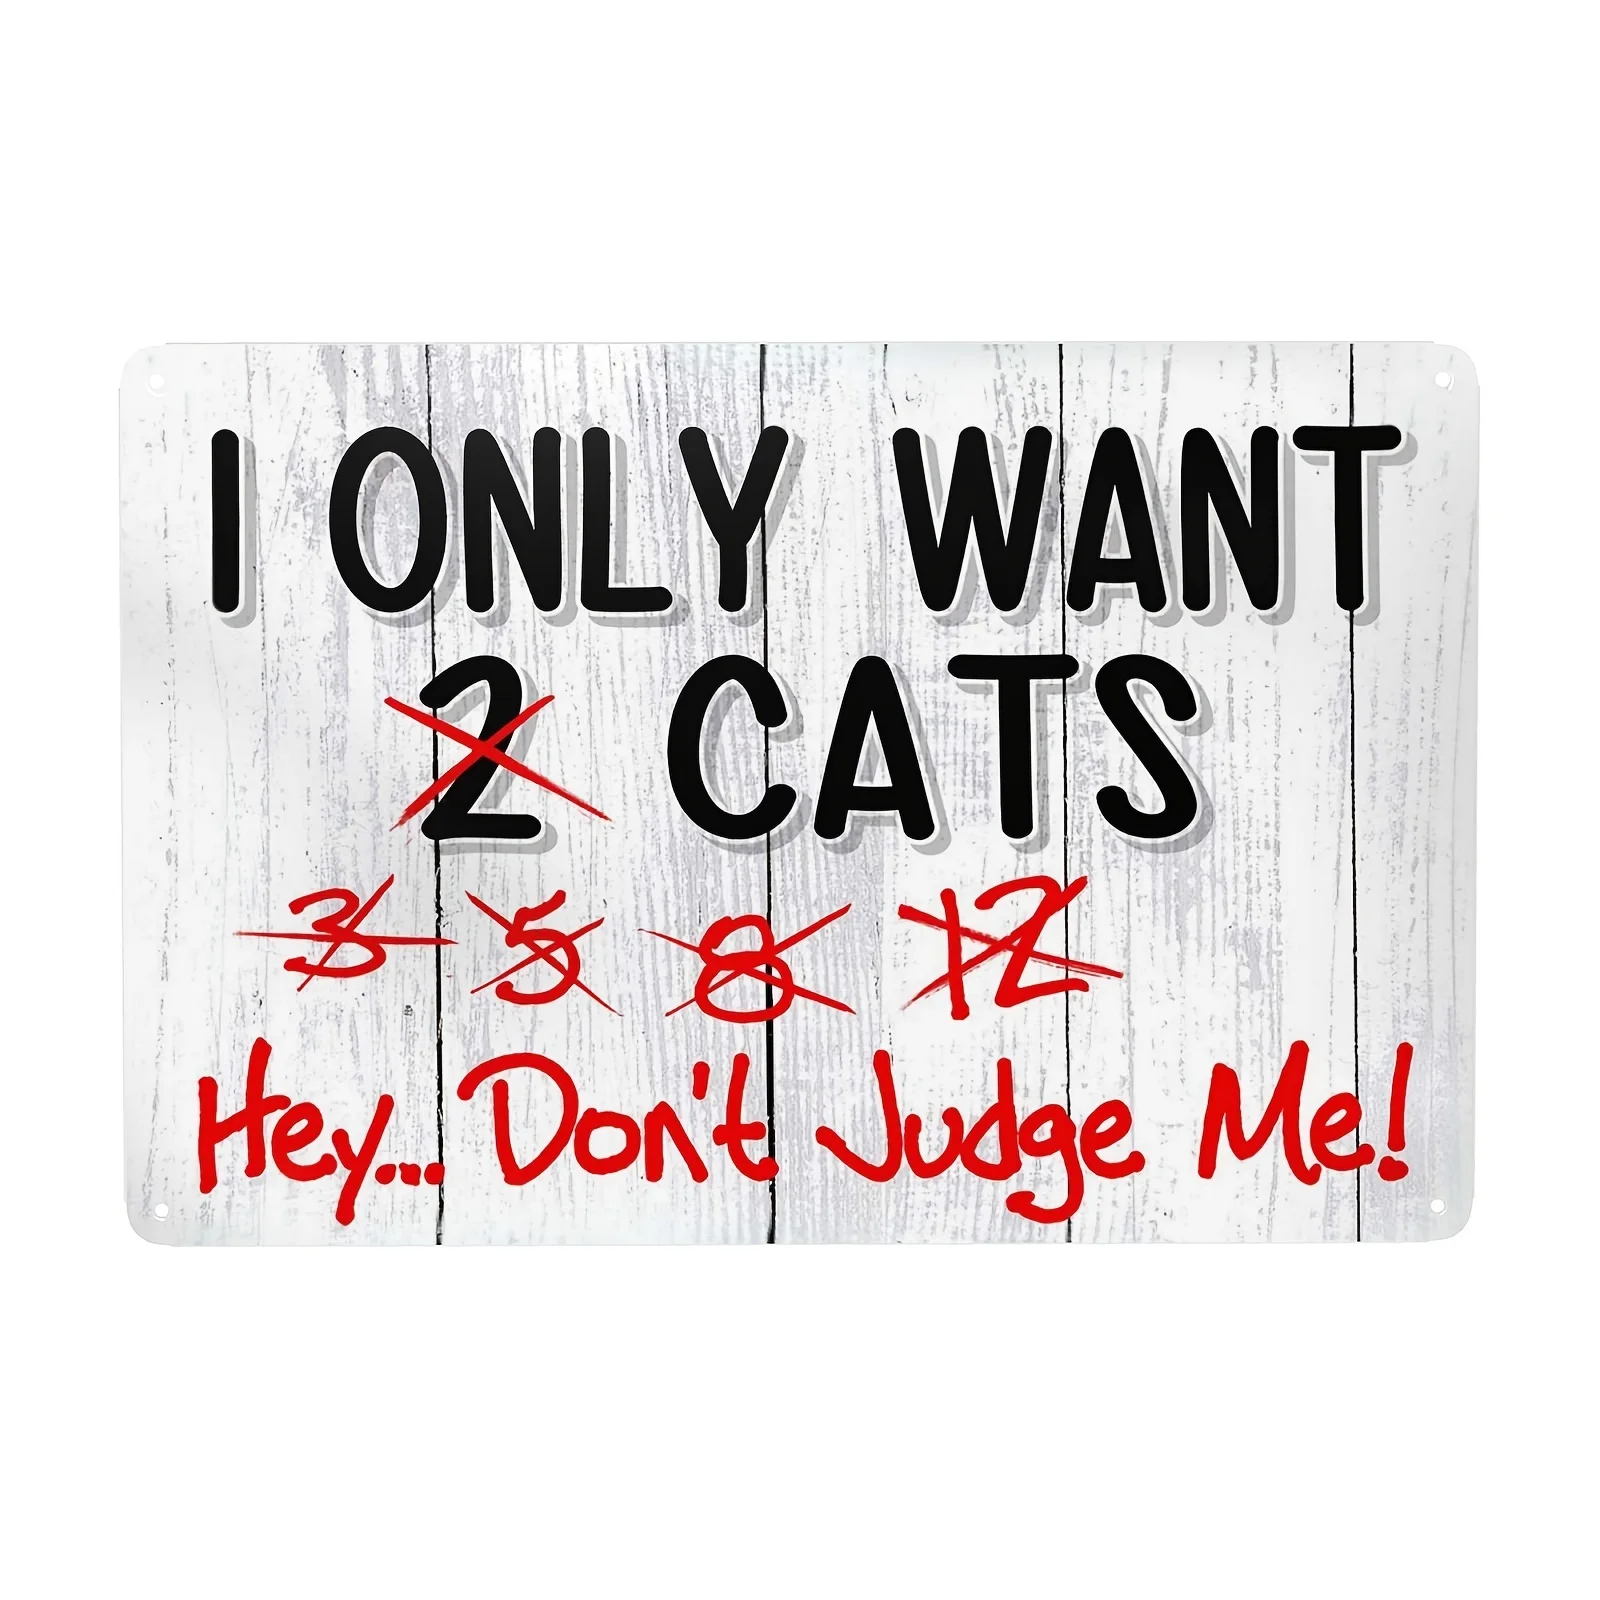 

Chic Tin Sign, Cat Sign I Only Want Cats Beware of Cat, Cat Decor, Funny Gag Gifts for Window, Office, Bedroom Decor, Funny Cat